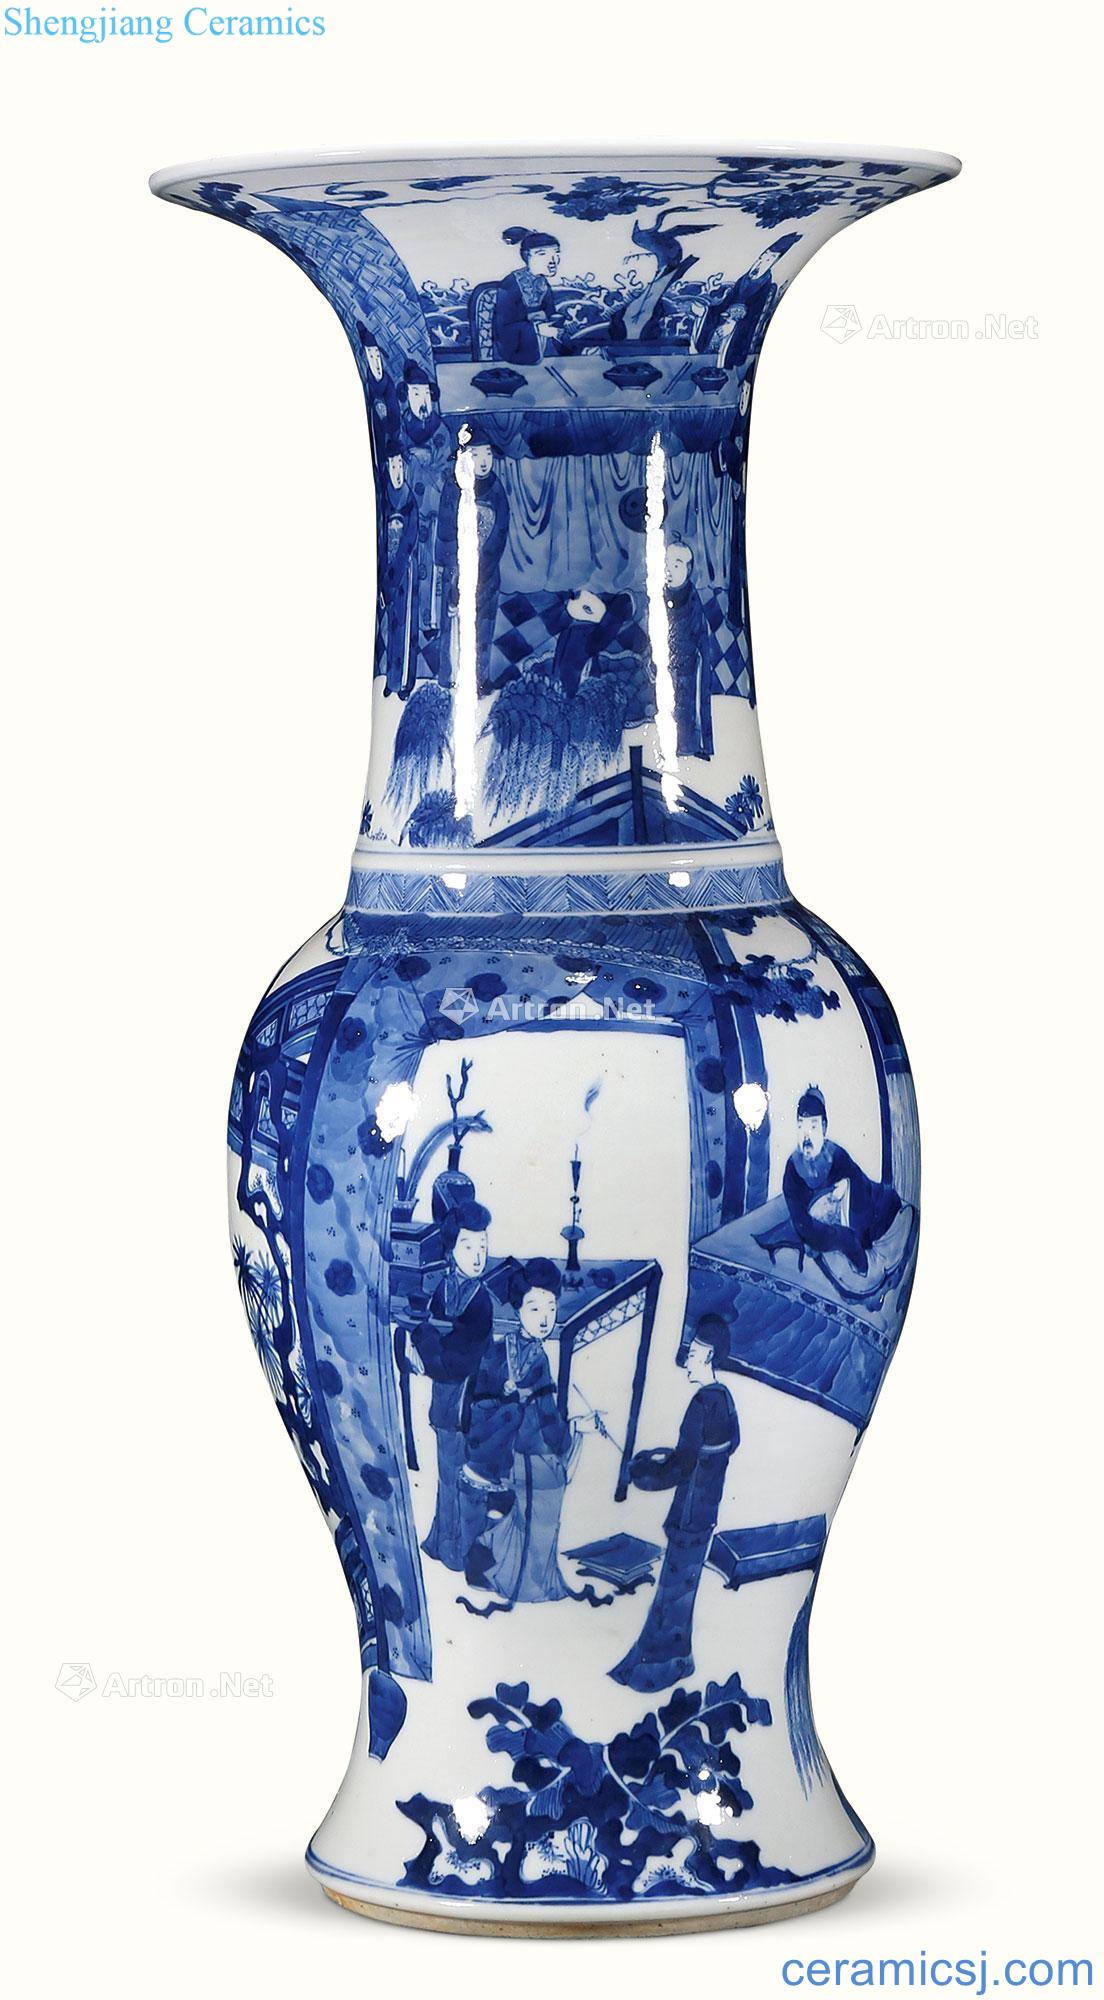 Qing guangxu Story lines flower vase with blue and white characters